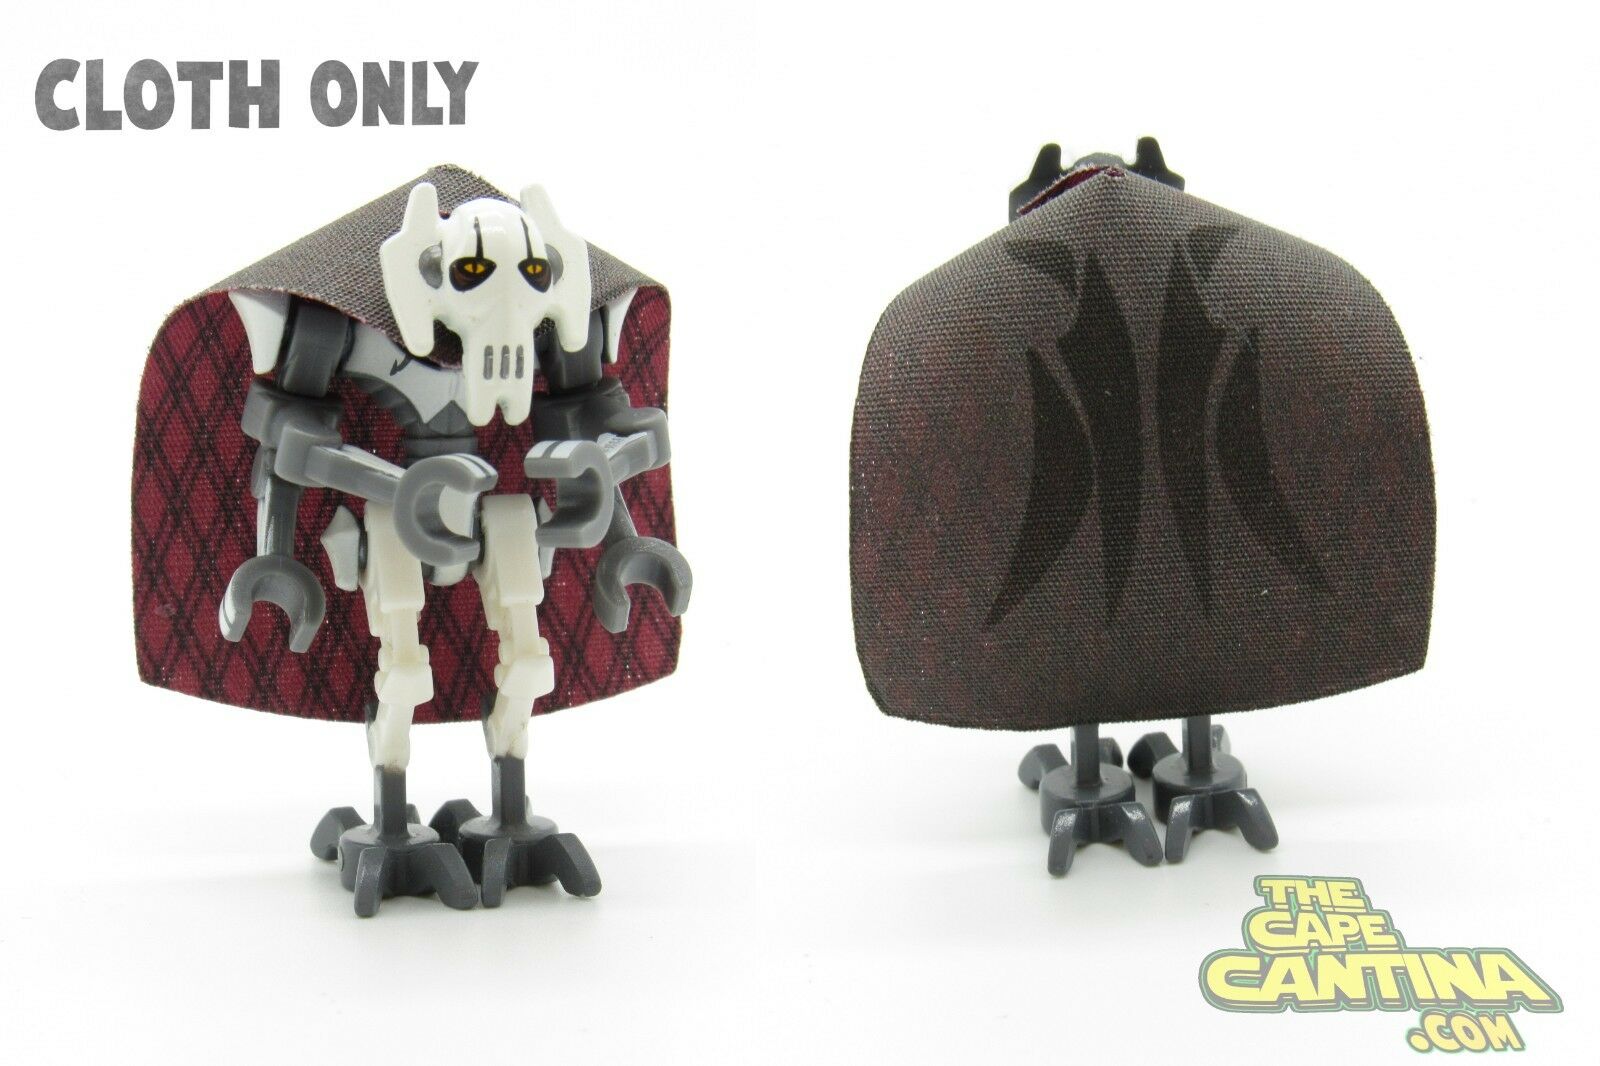 For Lego Star Wars Cloth Custom Royal Cape General Grievous Lot Of 1 Clone Wars